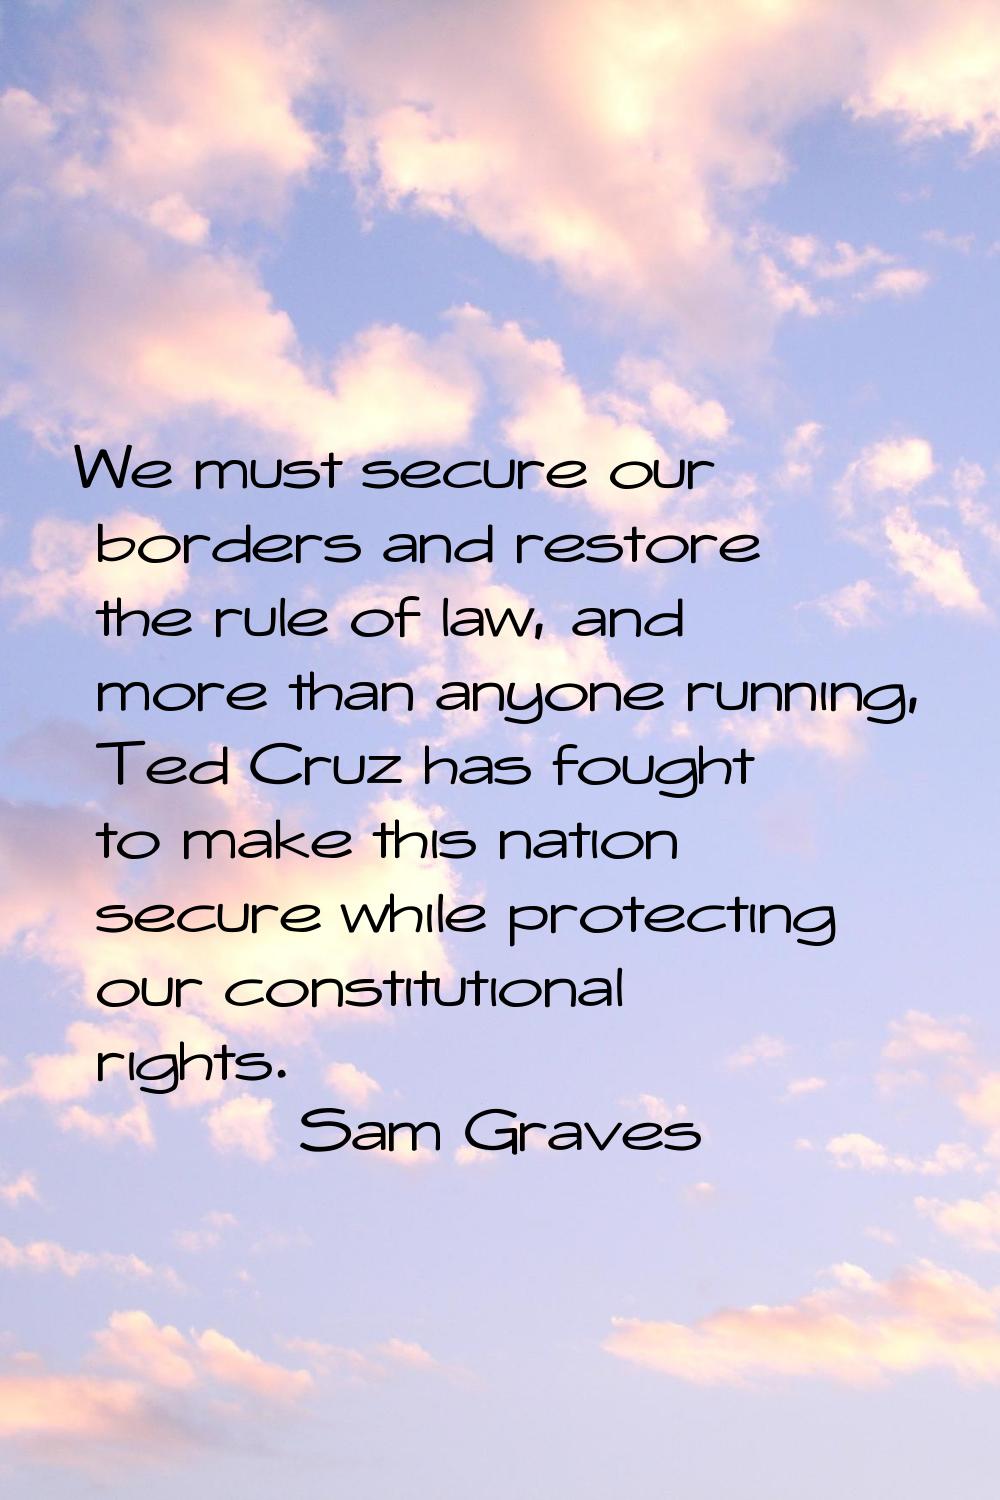 We must secure our borders and restore the rule of law, and more than anyone running, Ted Cruz has 